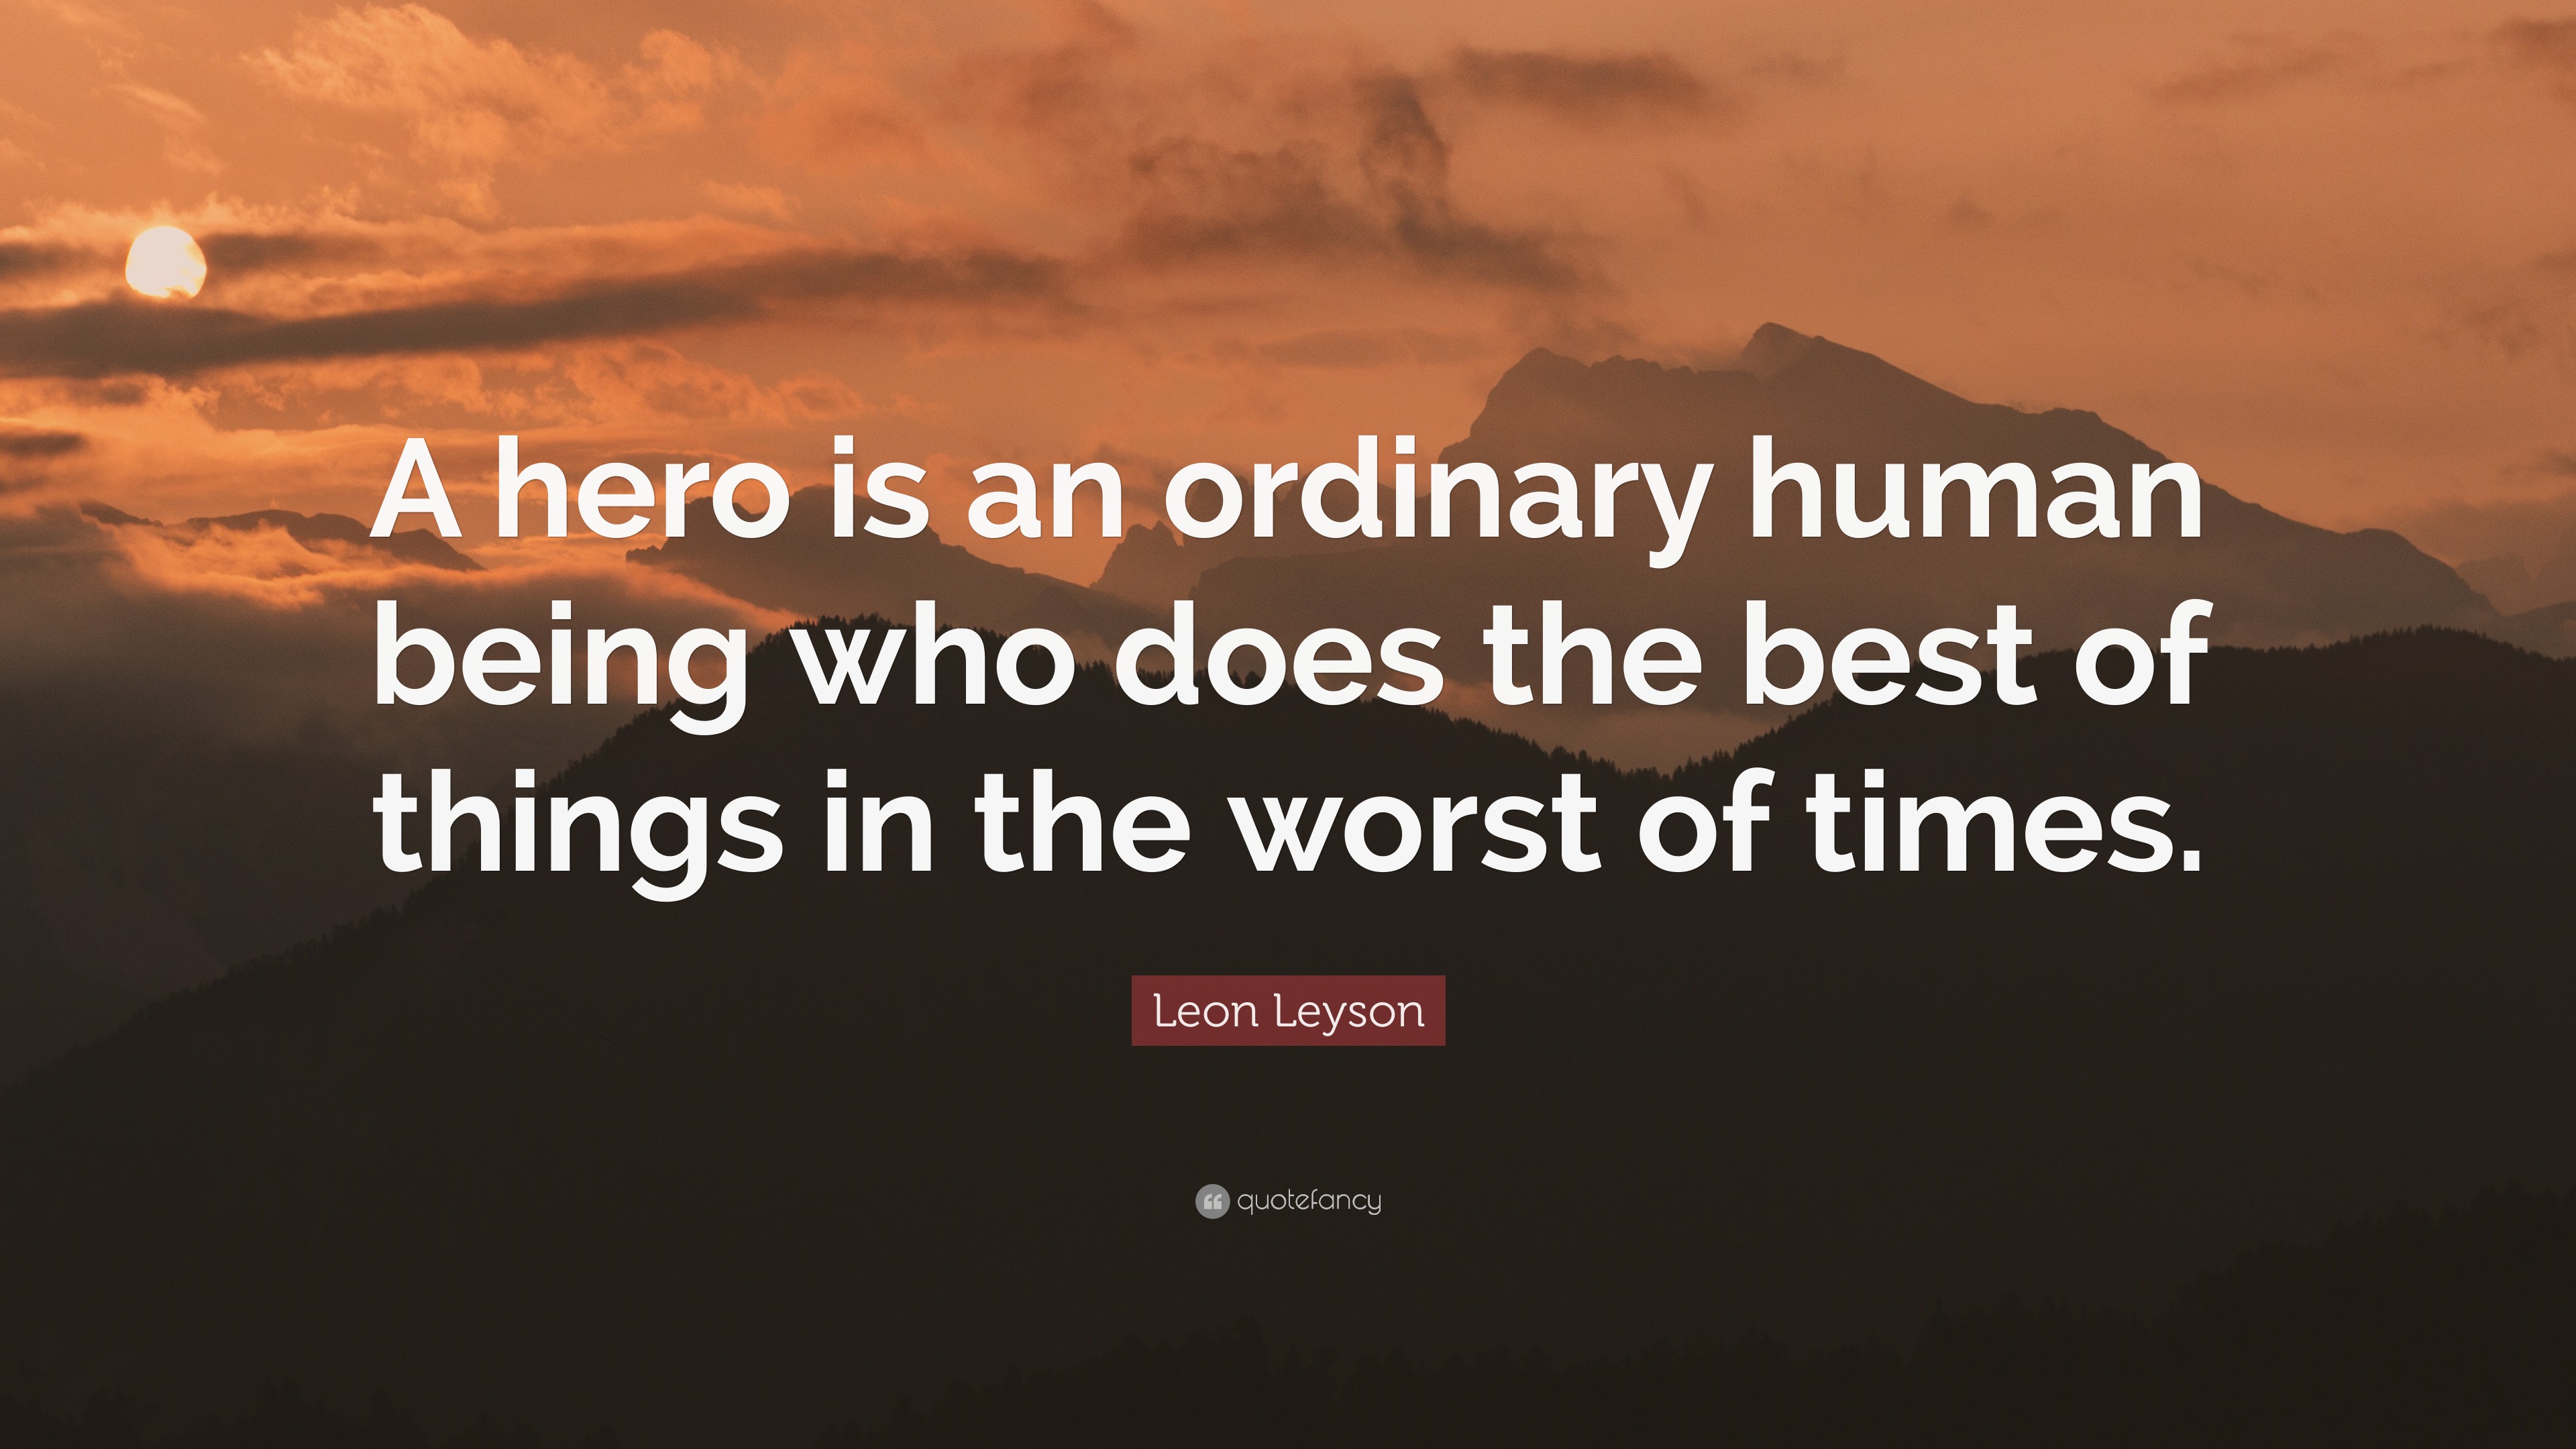 Leon Leyson Quote: “A hero is an ordinary human being who does the best ...